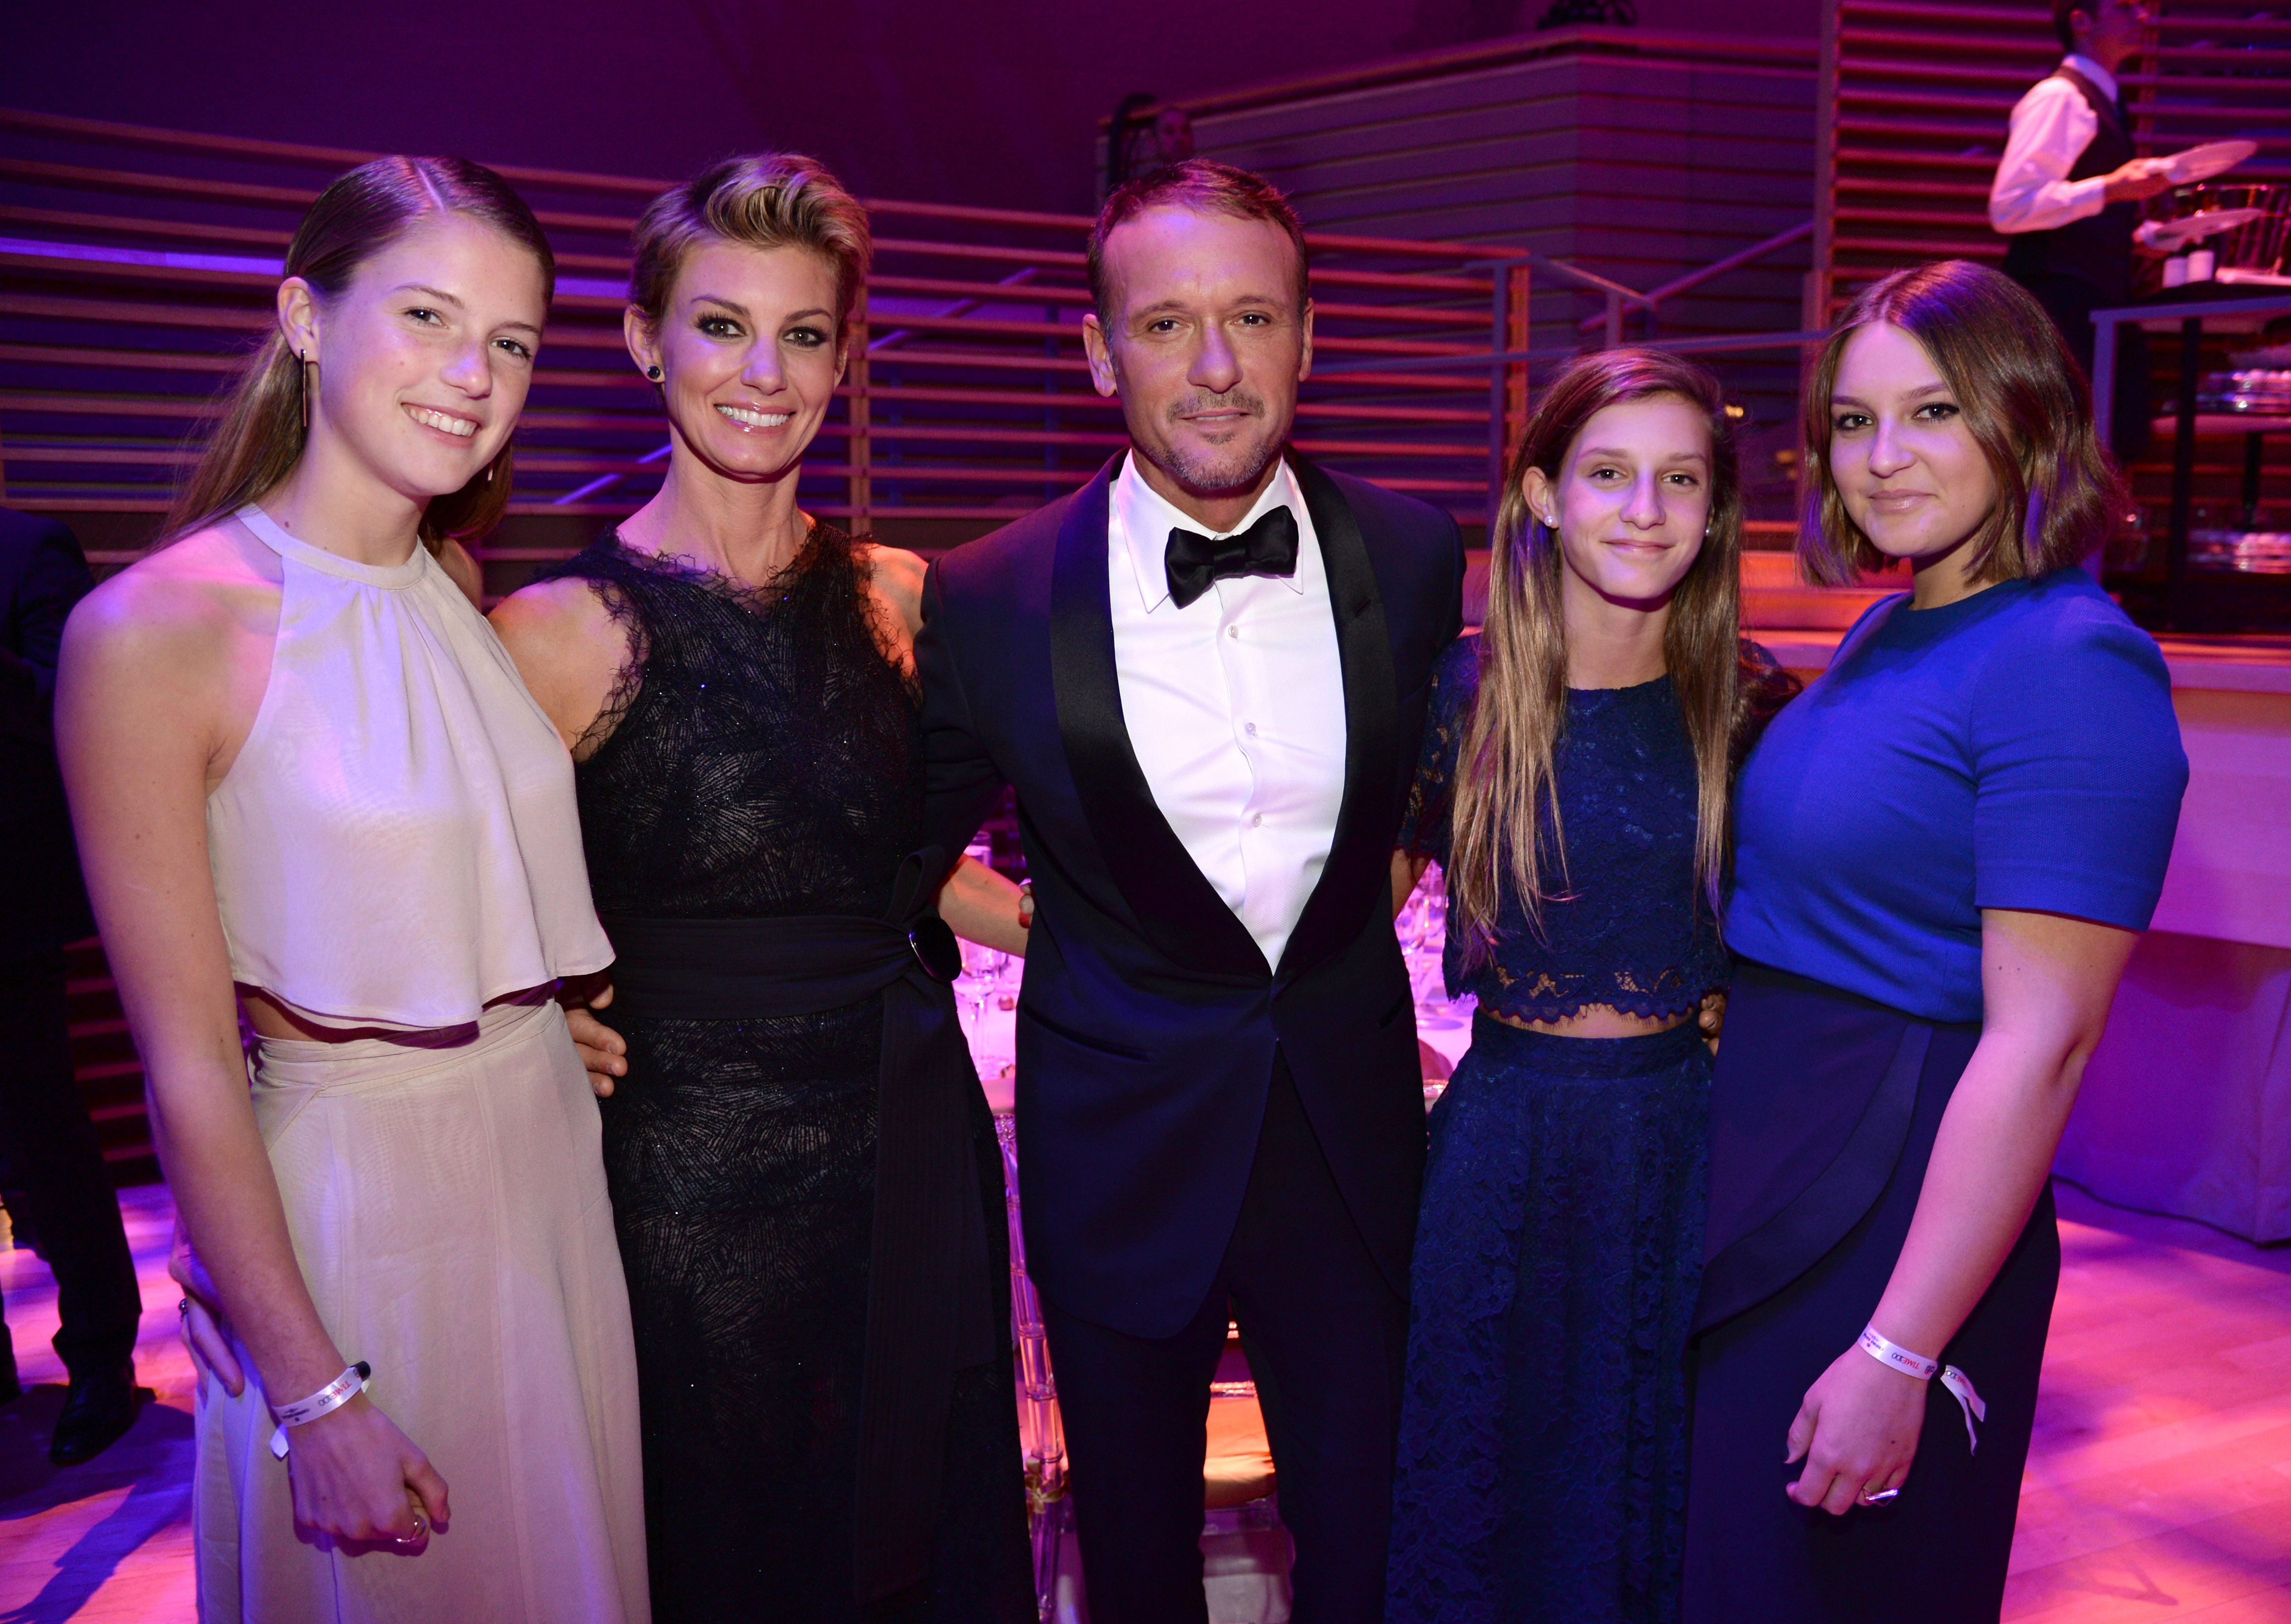 Gracie McGraw, Faith Hill, Tim McGraw, Audrey McGraw and Maggie McGraw in New York City on April 21, 2015 | Source: Getty Images